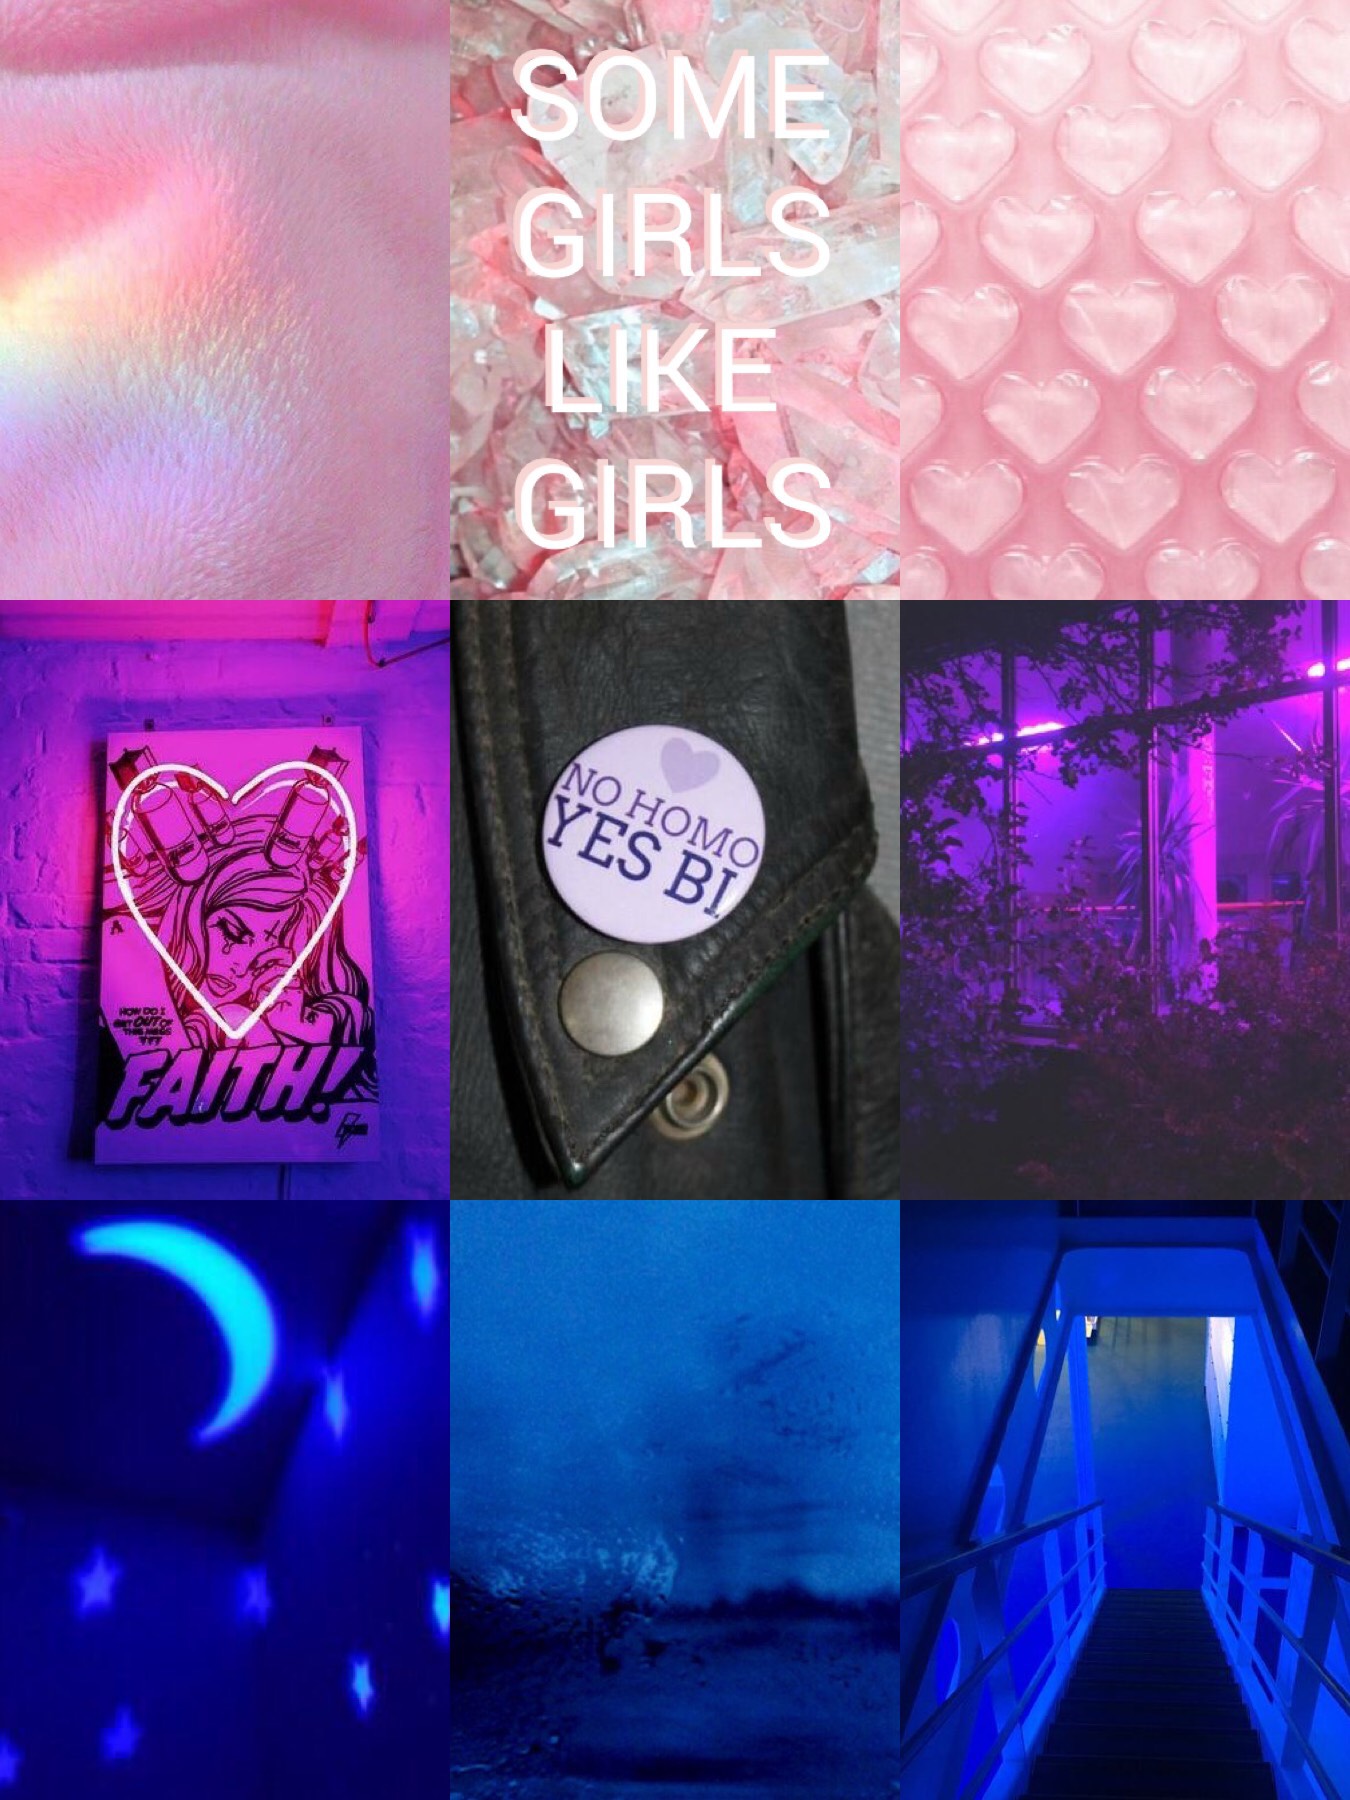 💙click💜
heyyy loookkk i made a mood board! idk what lgbt songs to make collages with next... any suggestions?? 